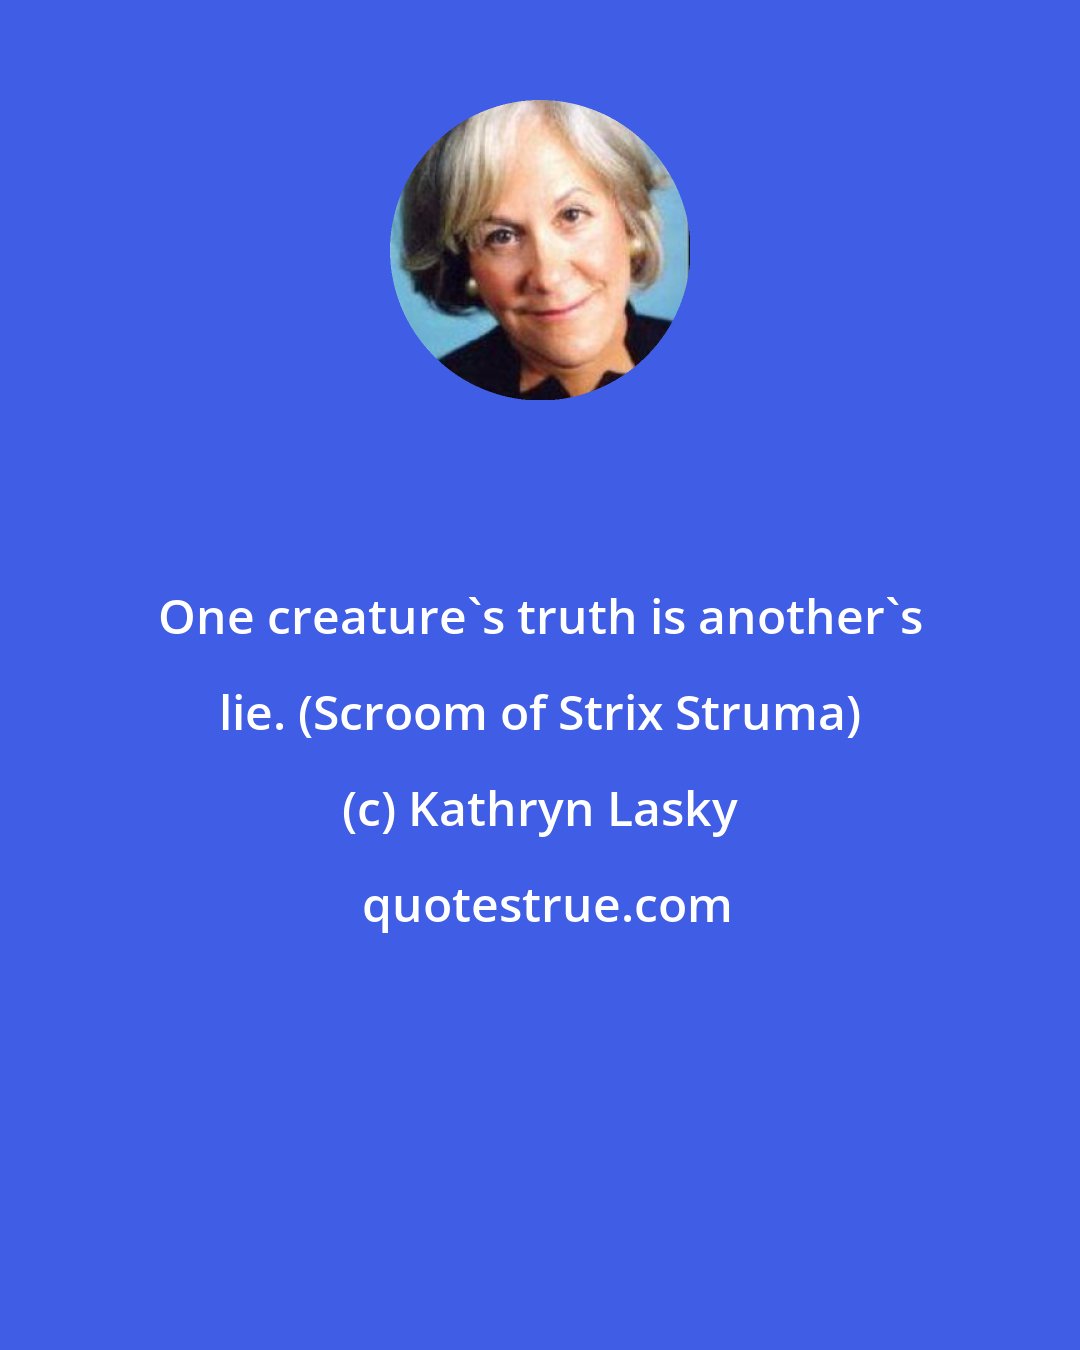 Kathryn Lasky: One creature's truth is another's lie. (Scroom of Strix Struma)